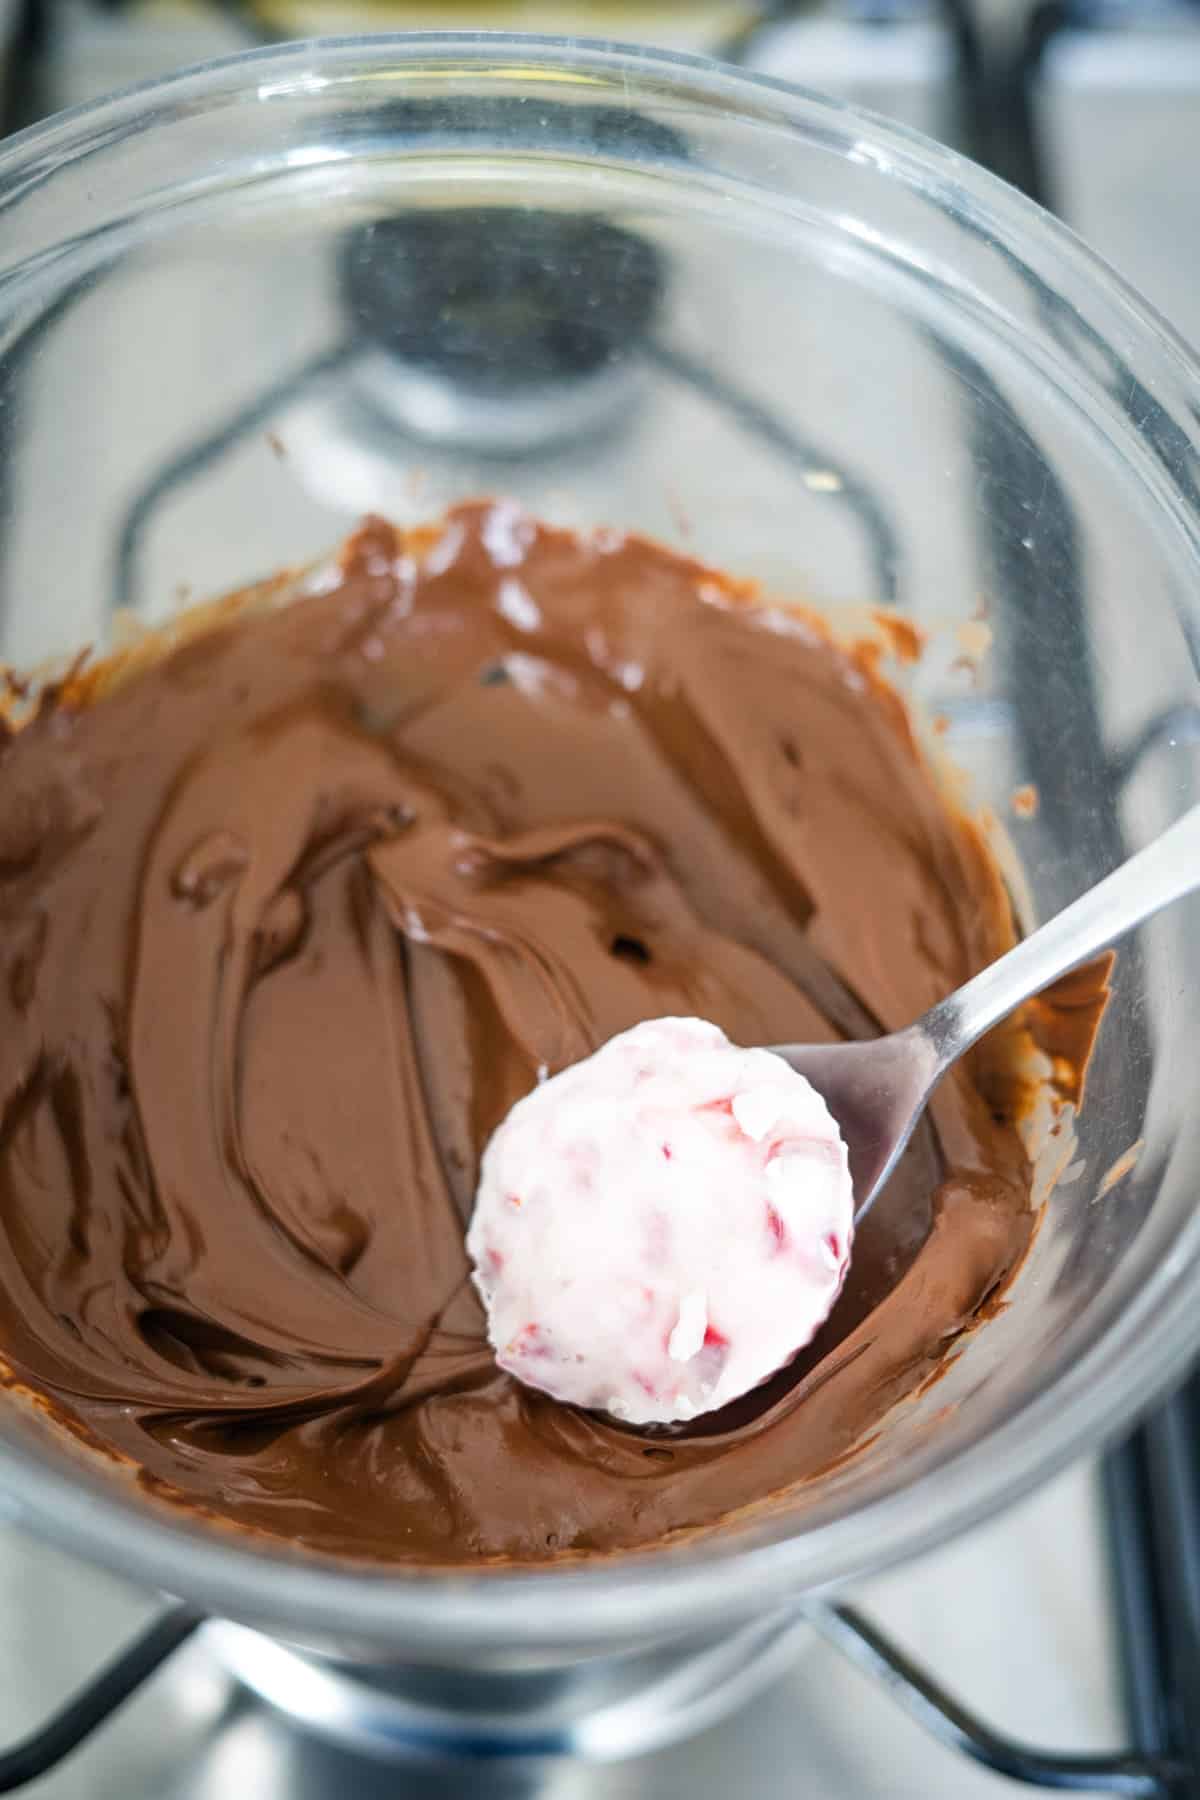 A bowl of rich chocolate ganache topped with a spoon.